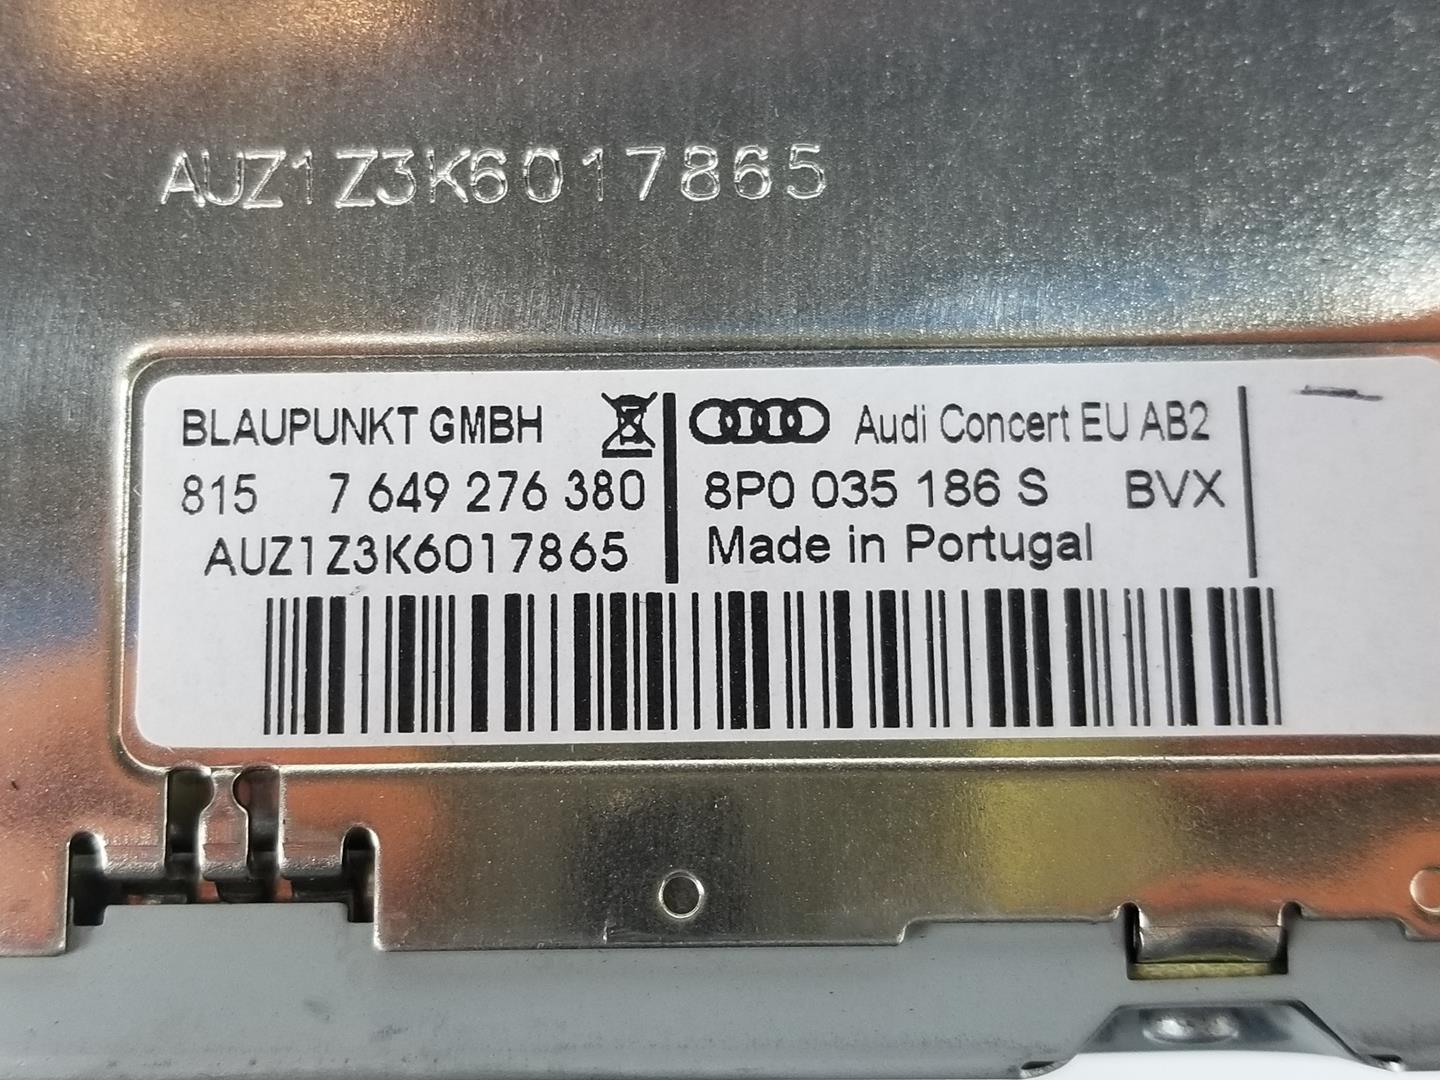 AUDI A2 8Z (1999-2005) Music Player Without GPS 8P0035186S, 8P0035186S 19931619